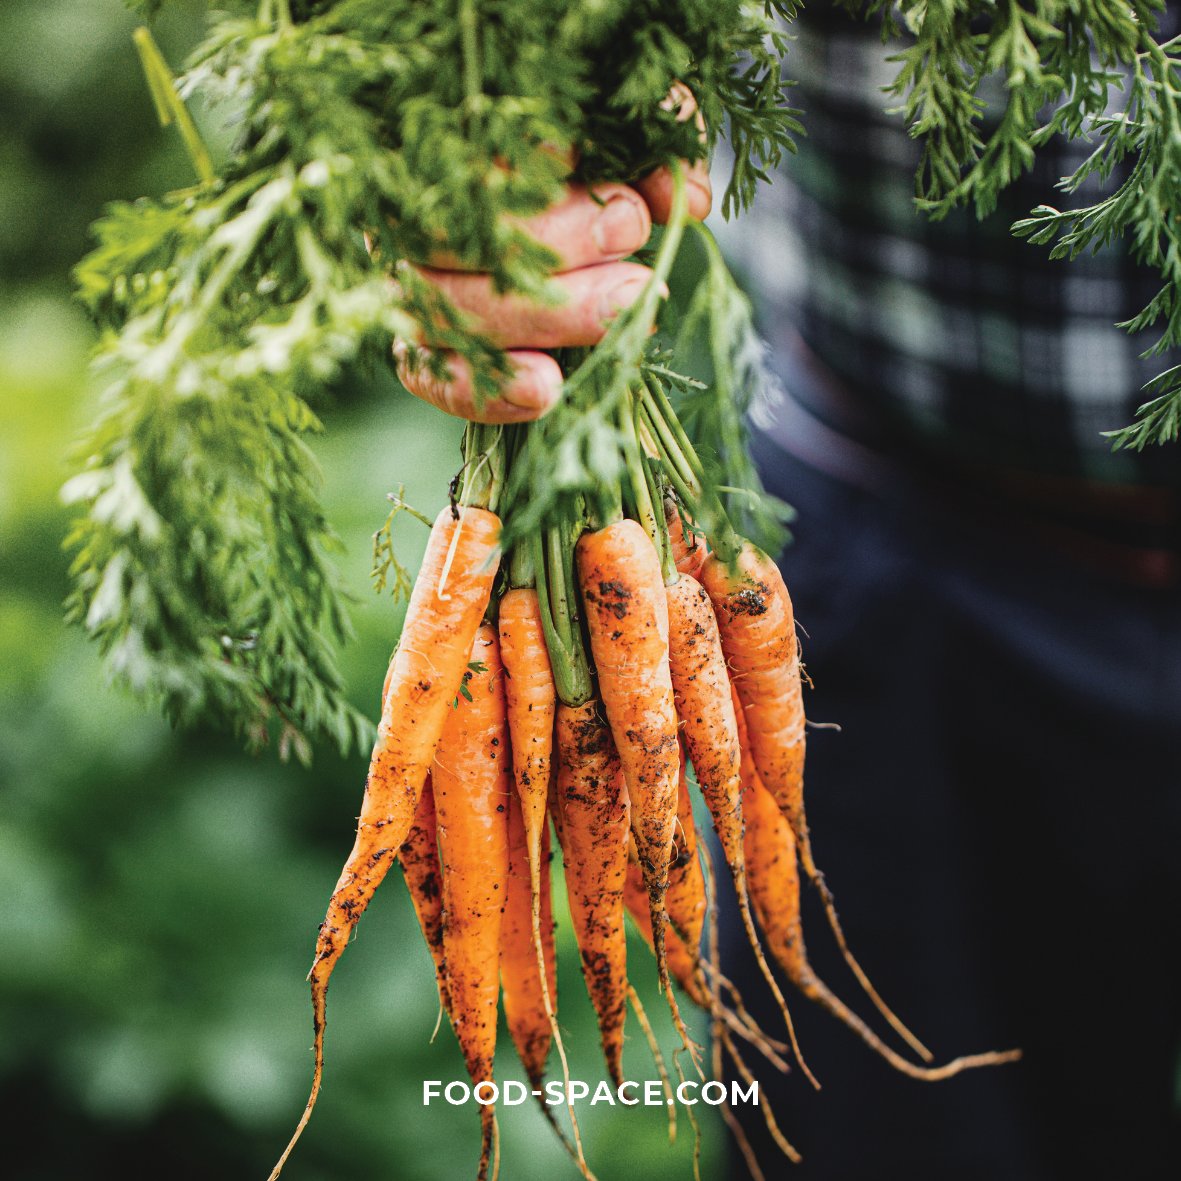 Happy International Carrot Day!🥕 It is the day when the carrot is a STAR! ⭐️The best and tastiest way to celebrate is making sure that carrots are featured in every meal! At FoodSpace we celebrate this root in all its uses, forms and flavours! 🍽🥕😋

#worldcarrotday #carrots